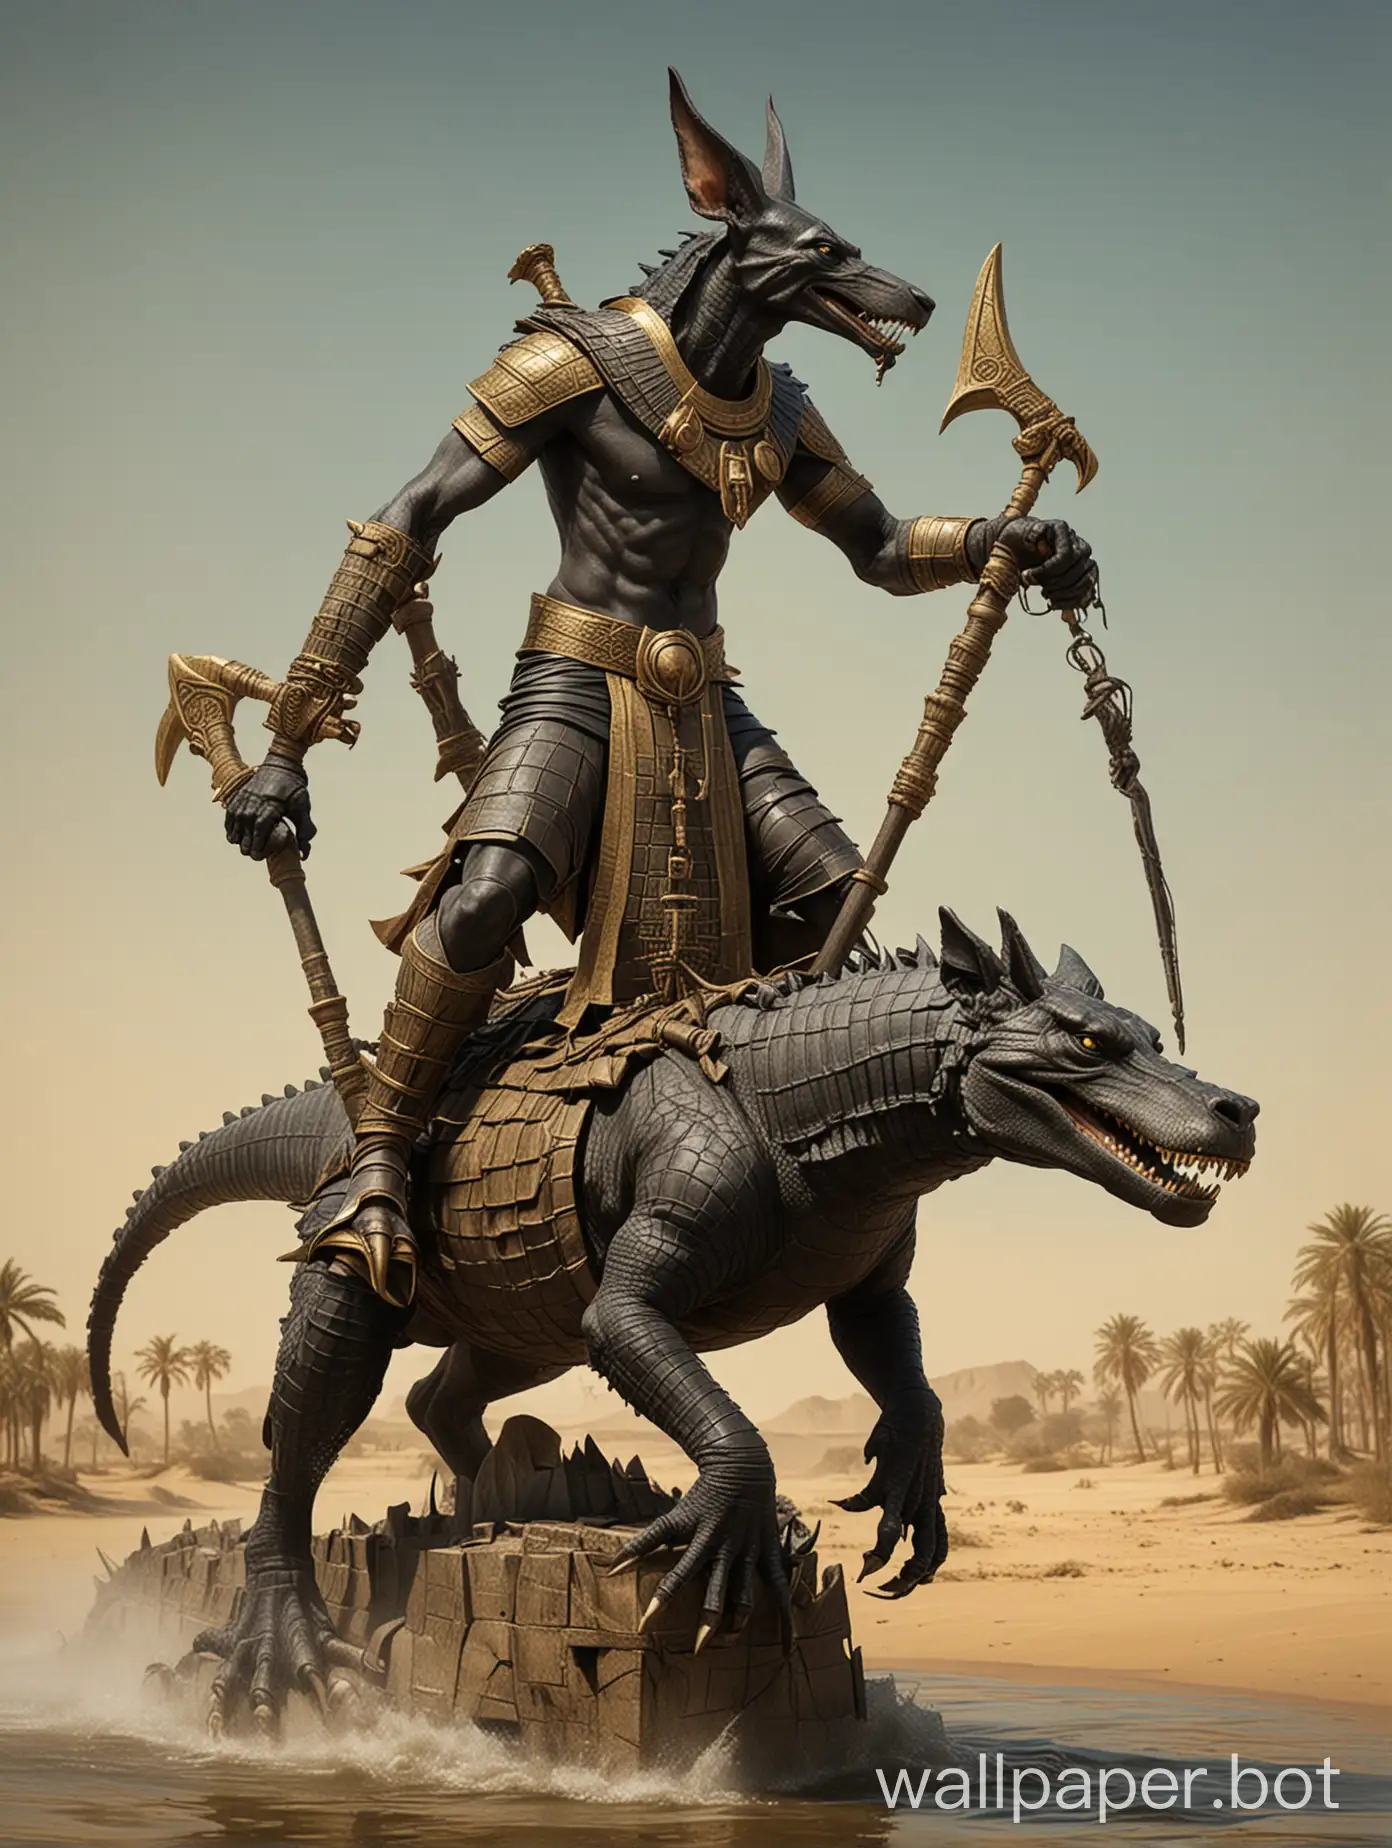 anubis riding on a menacing-looking alligator's back holding up the crook and flail